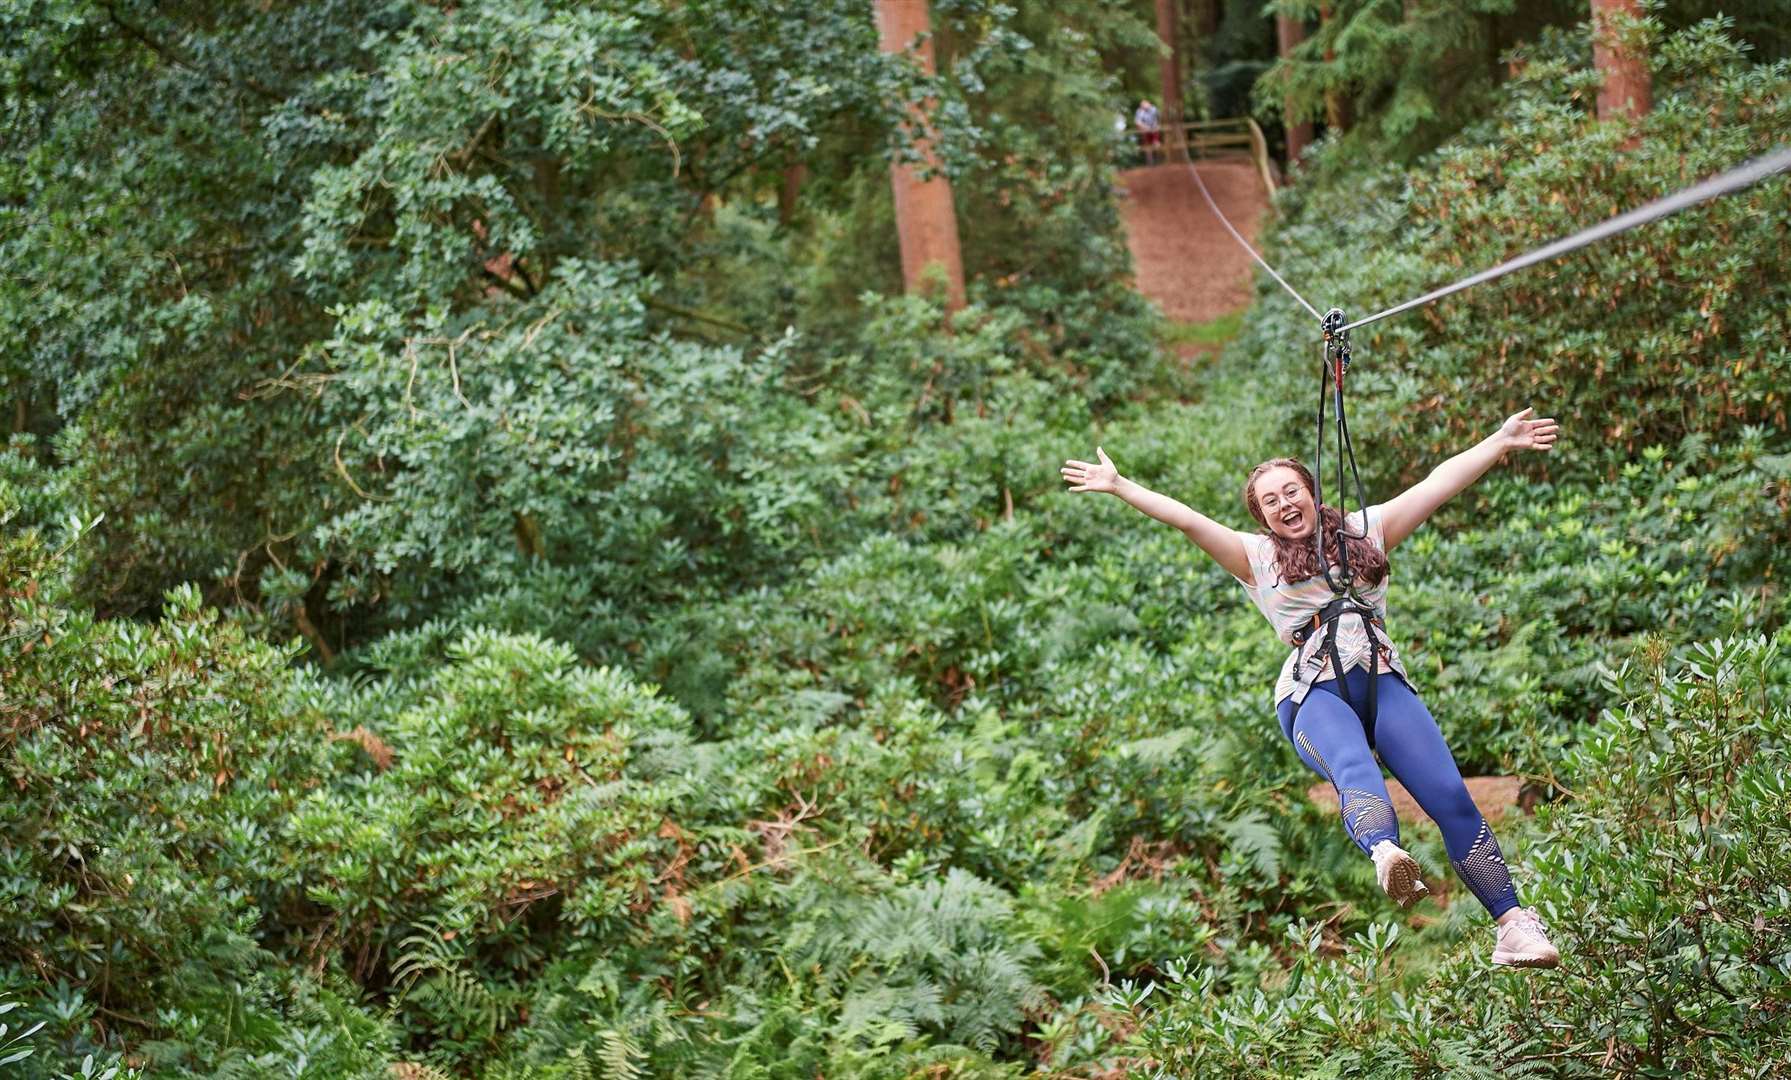 There's treetop adventure to be had now